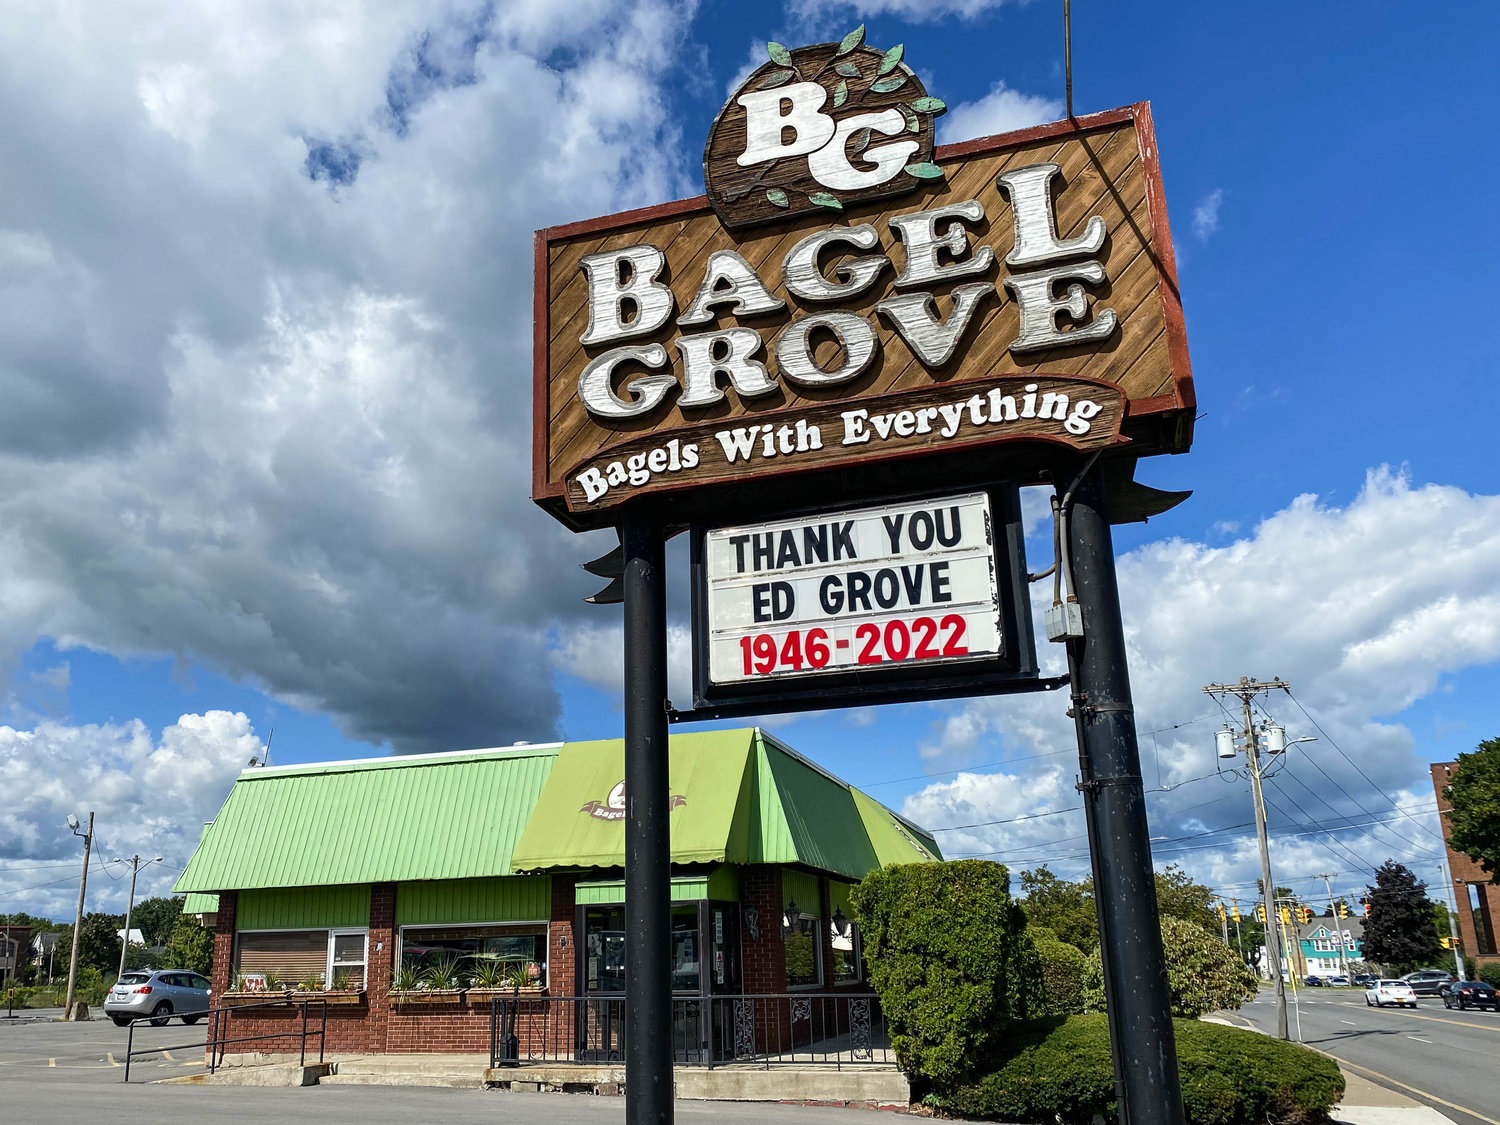 Bagel Grove, 7 Burrstone Road, Utica, honors Ed Grove, the founder of the authentic bagelry, on their sign outside the establishment.